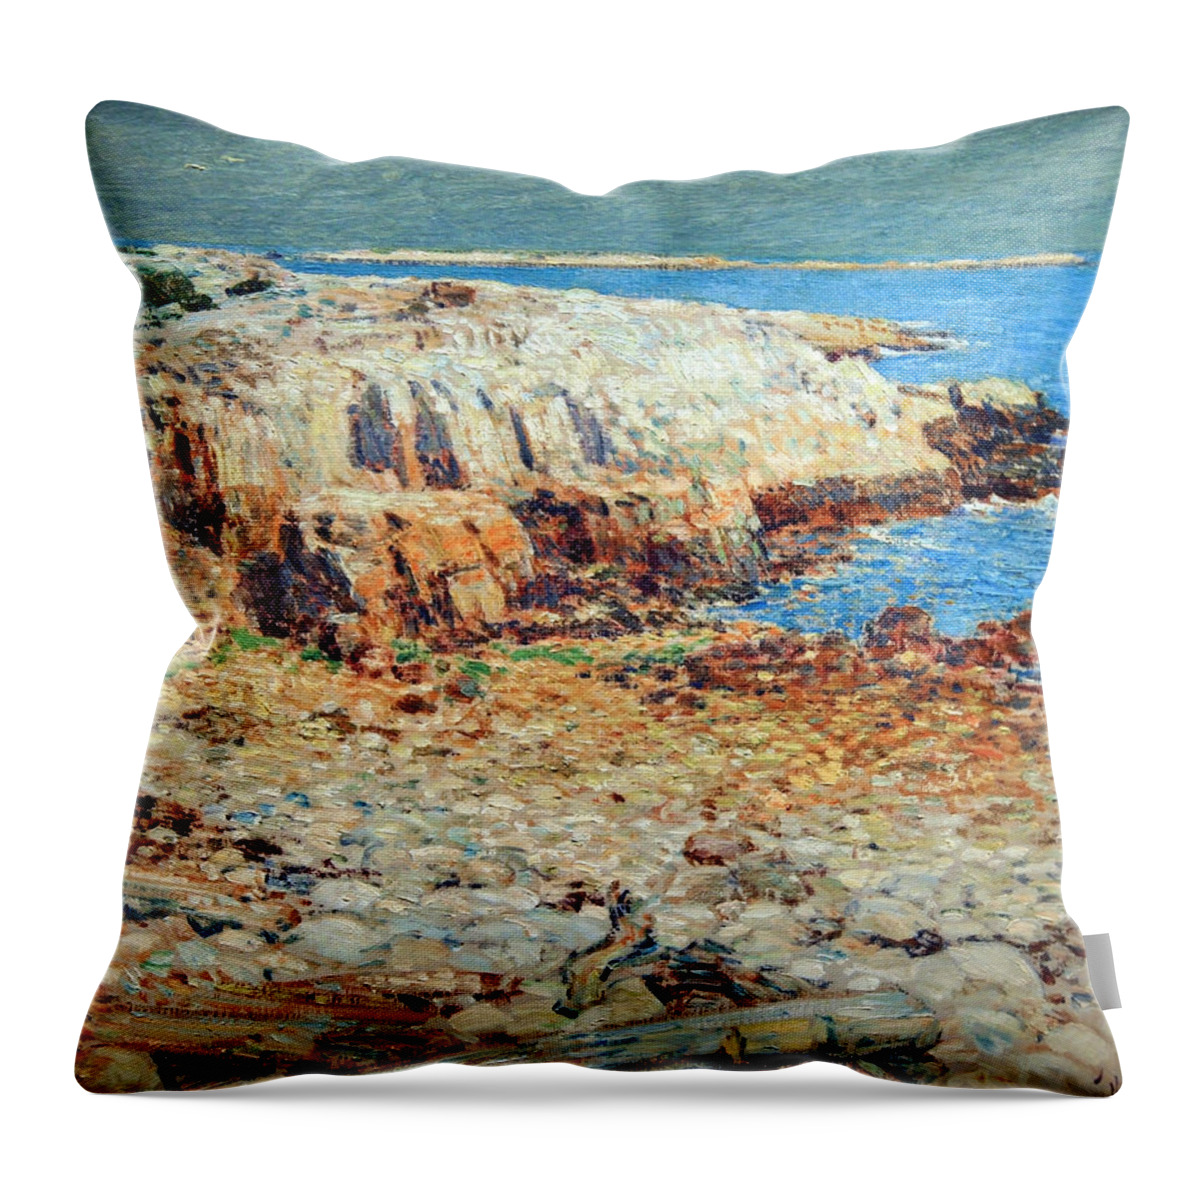 A North East Headland Throw Pillow featuring the photograph Hassam's A North East Headland by Cora Wandel